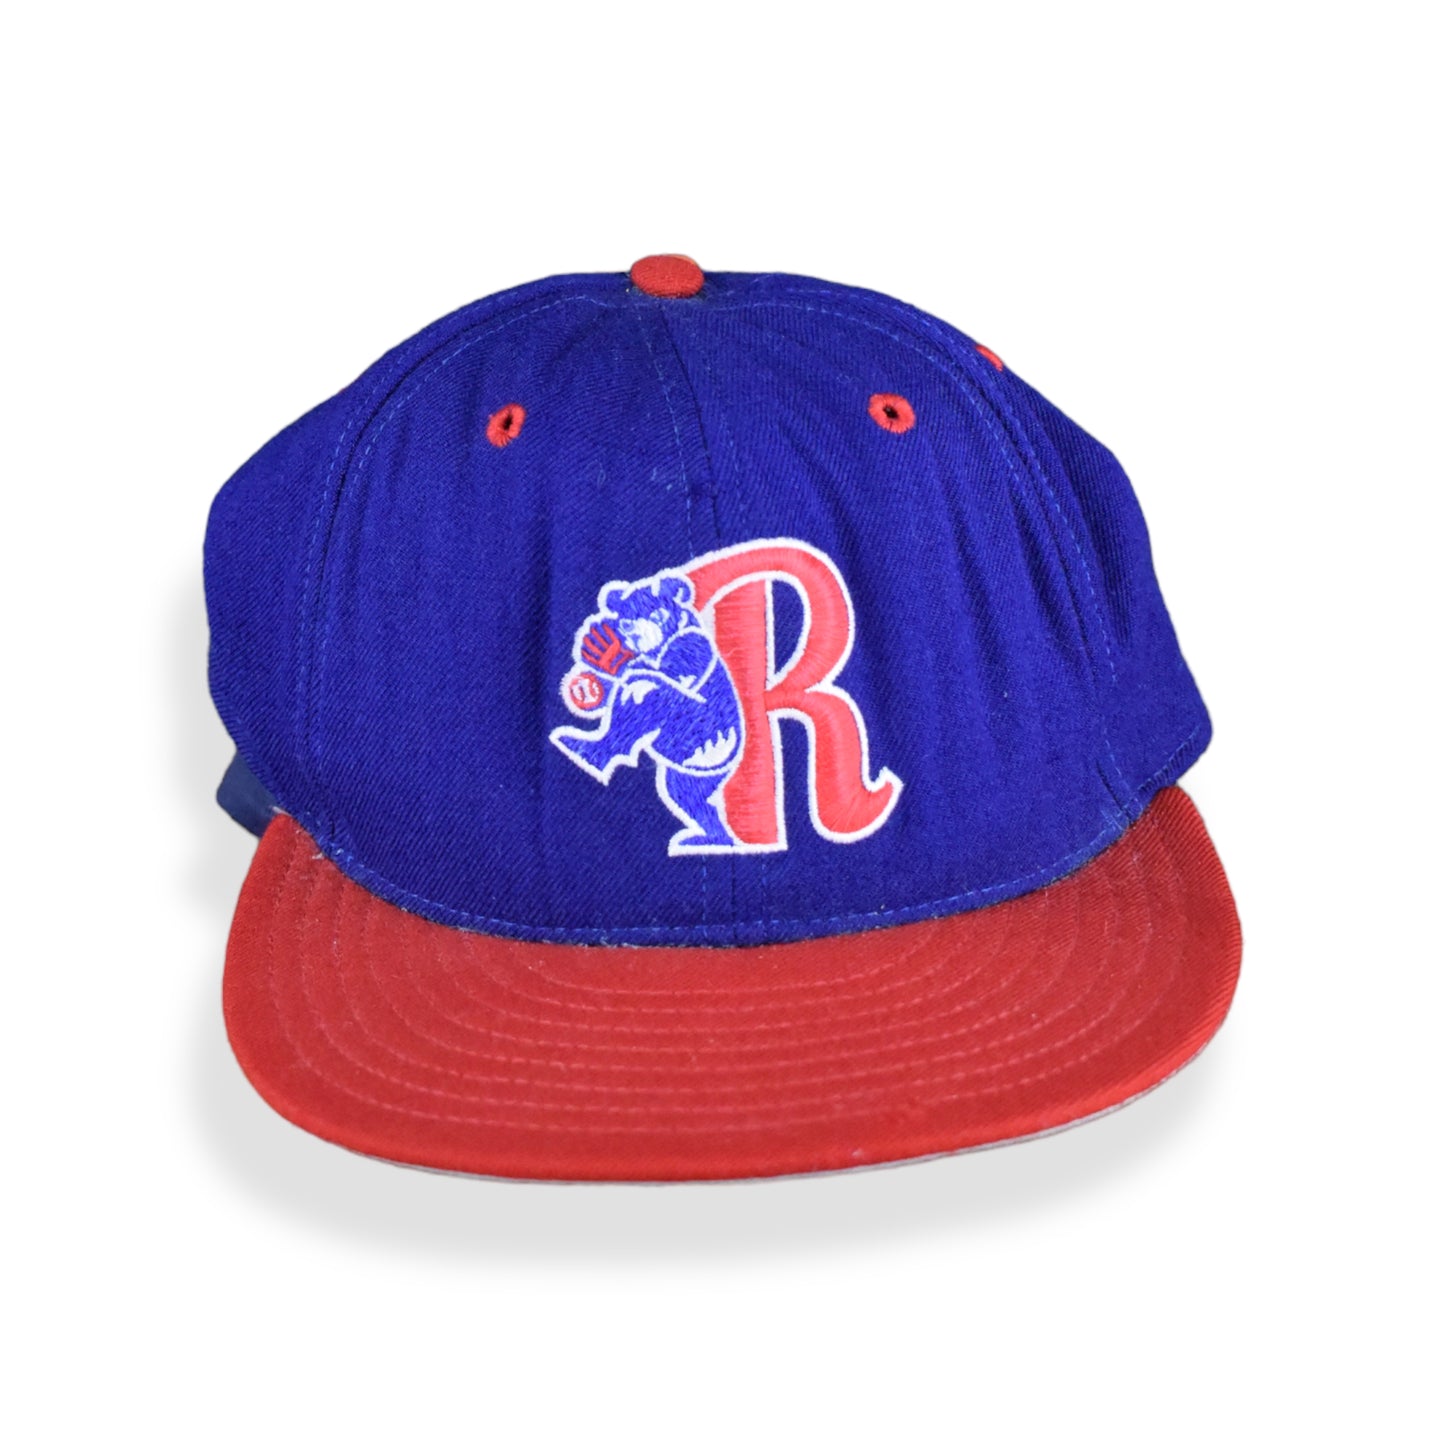 ‘90s Rockford Cubbies Fitted Hat